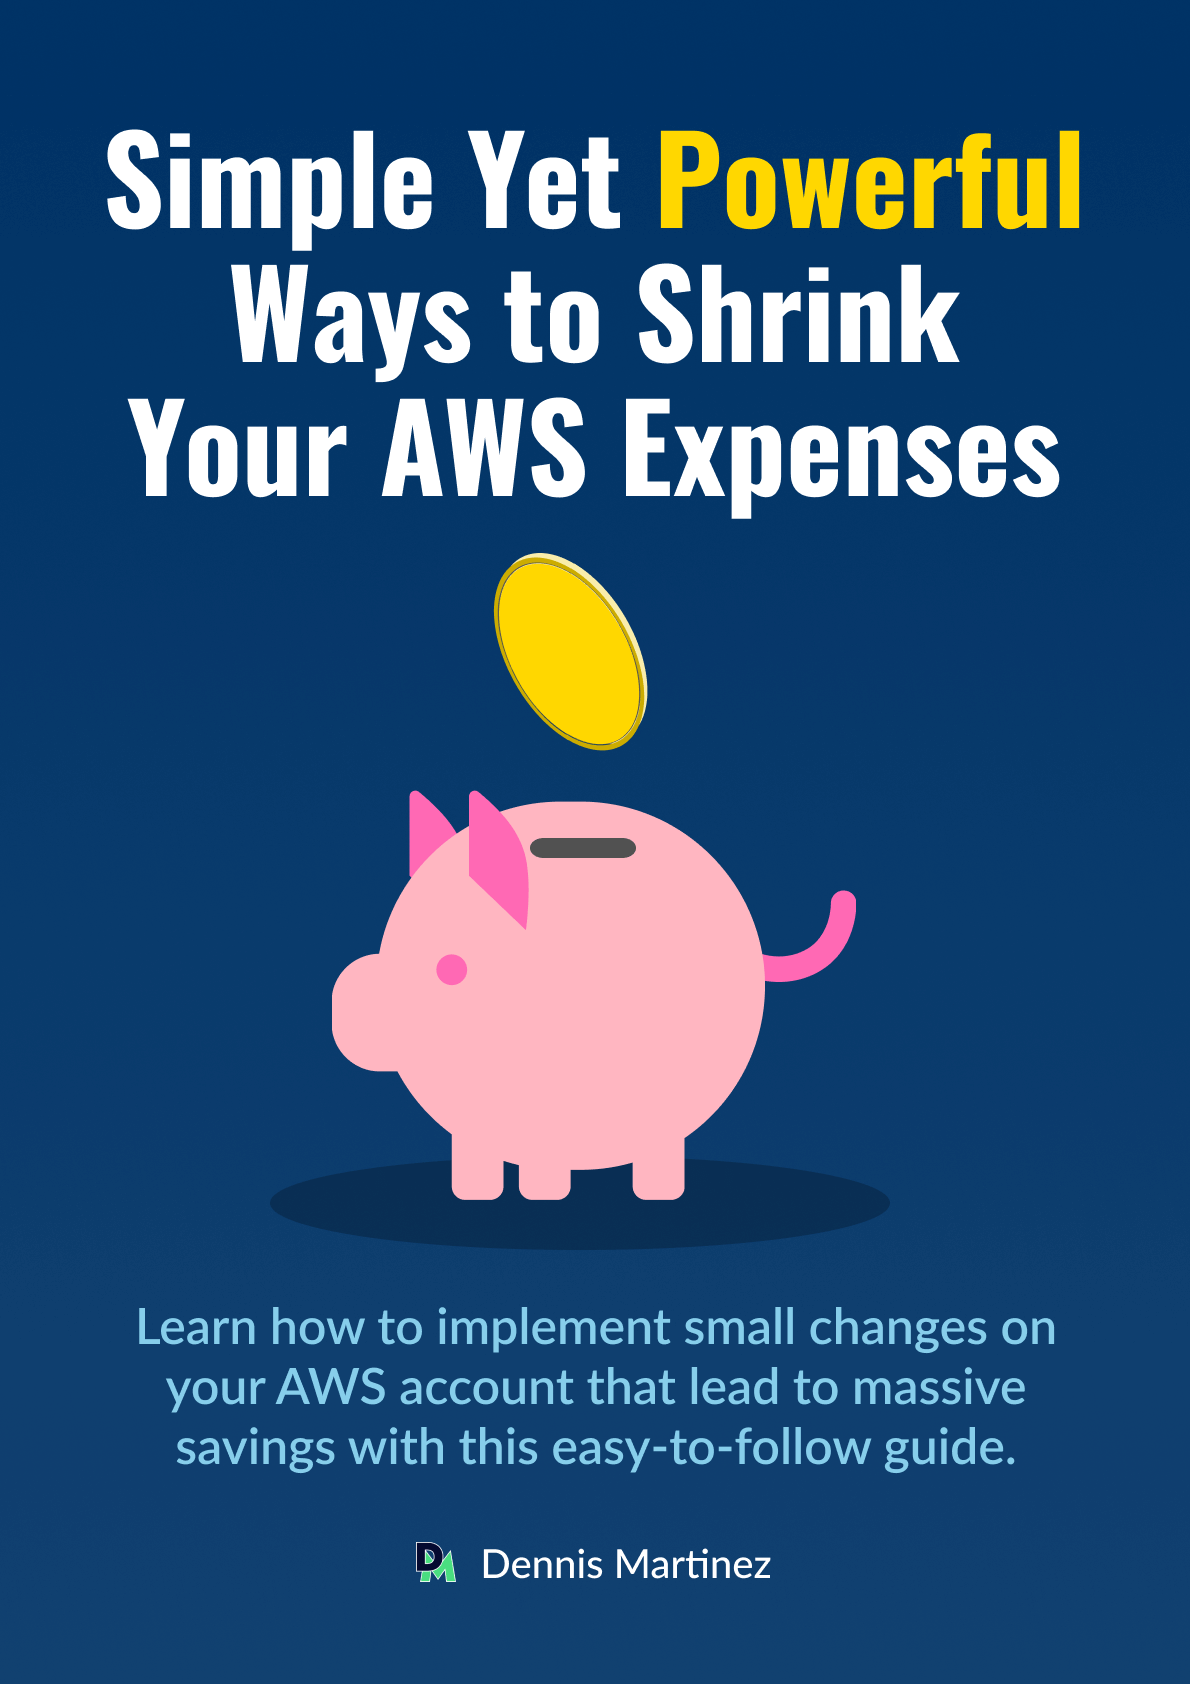 Simple Yet Powerful Ways to Shrink Your AWS Expenses - Guide Cover